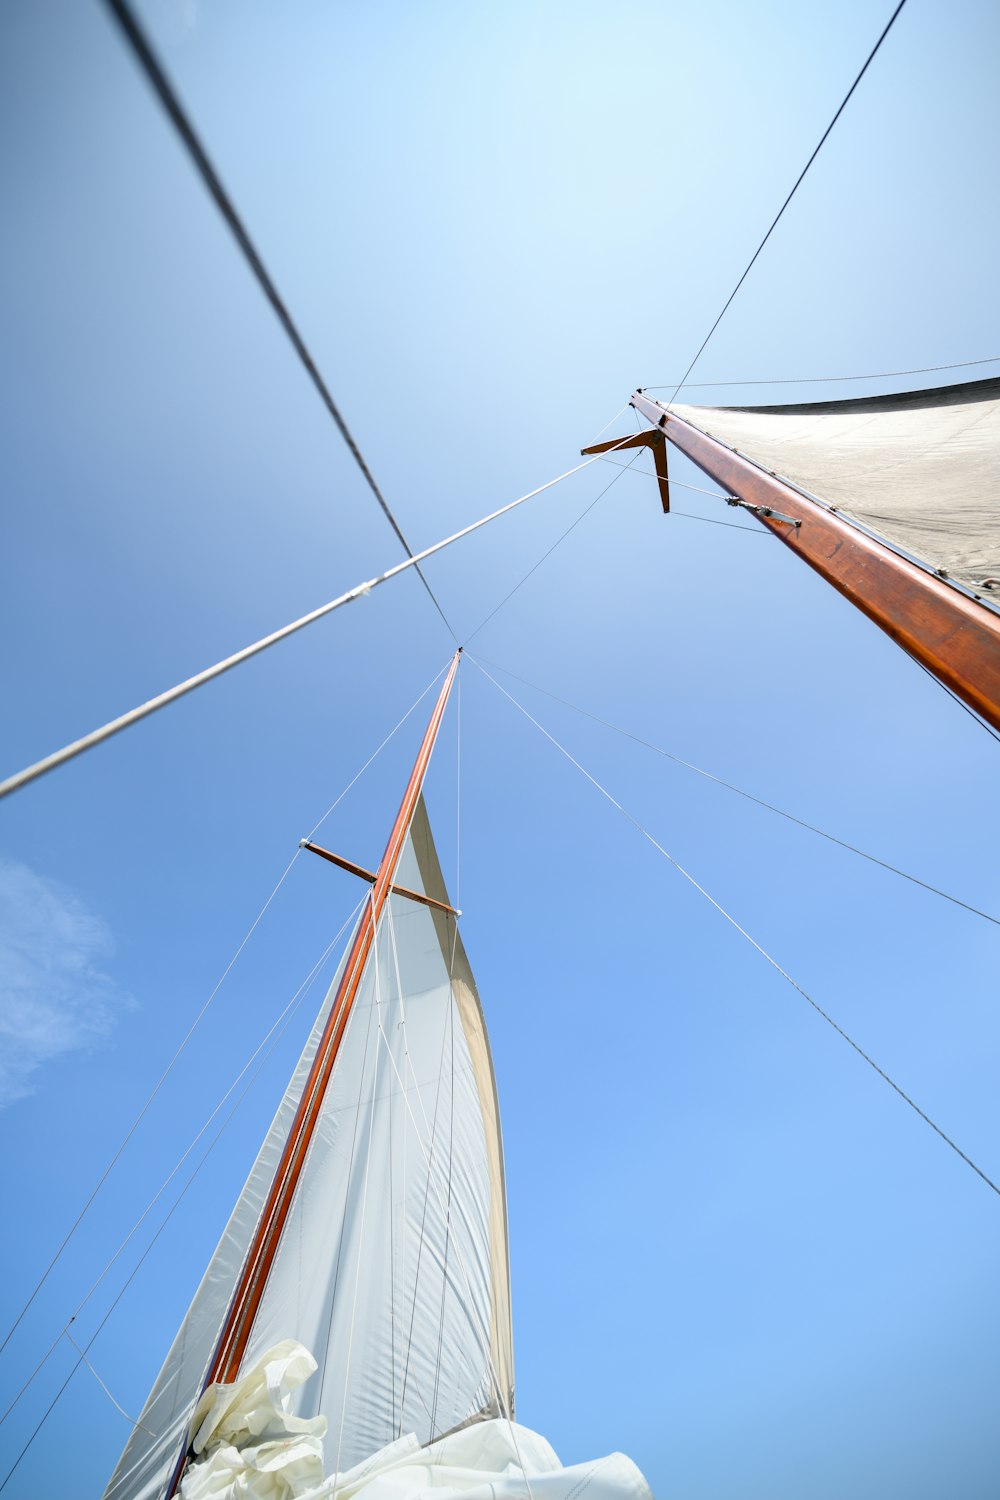 brown and white sail boat on water under blue sky during daytime